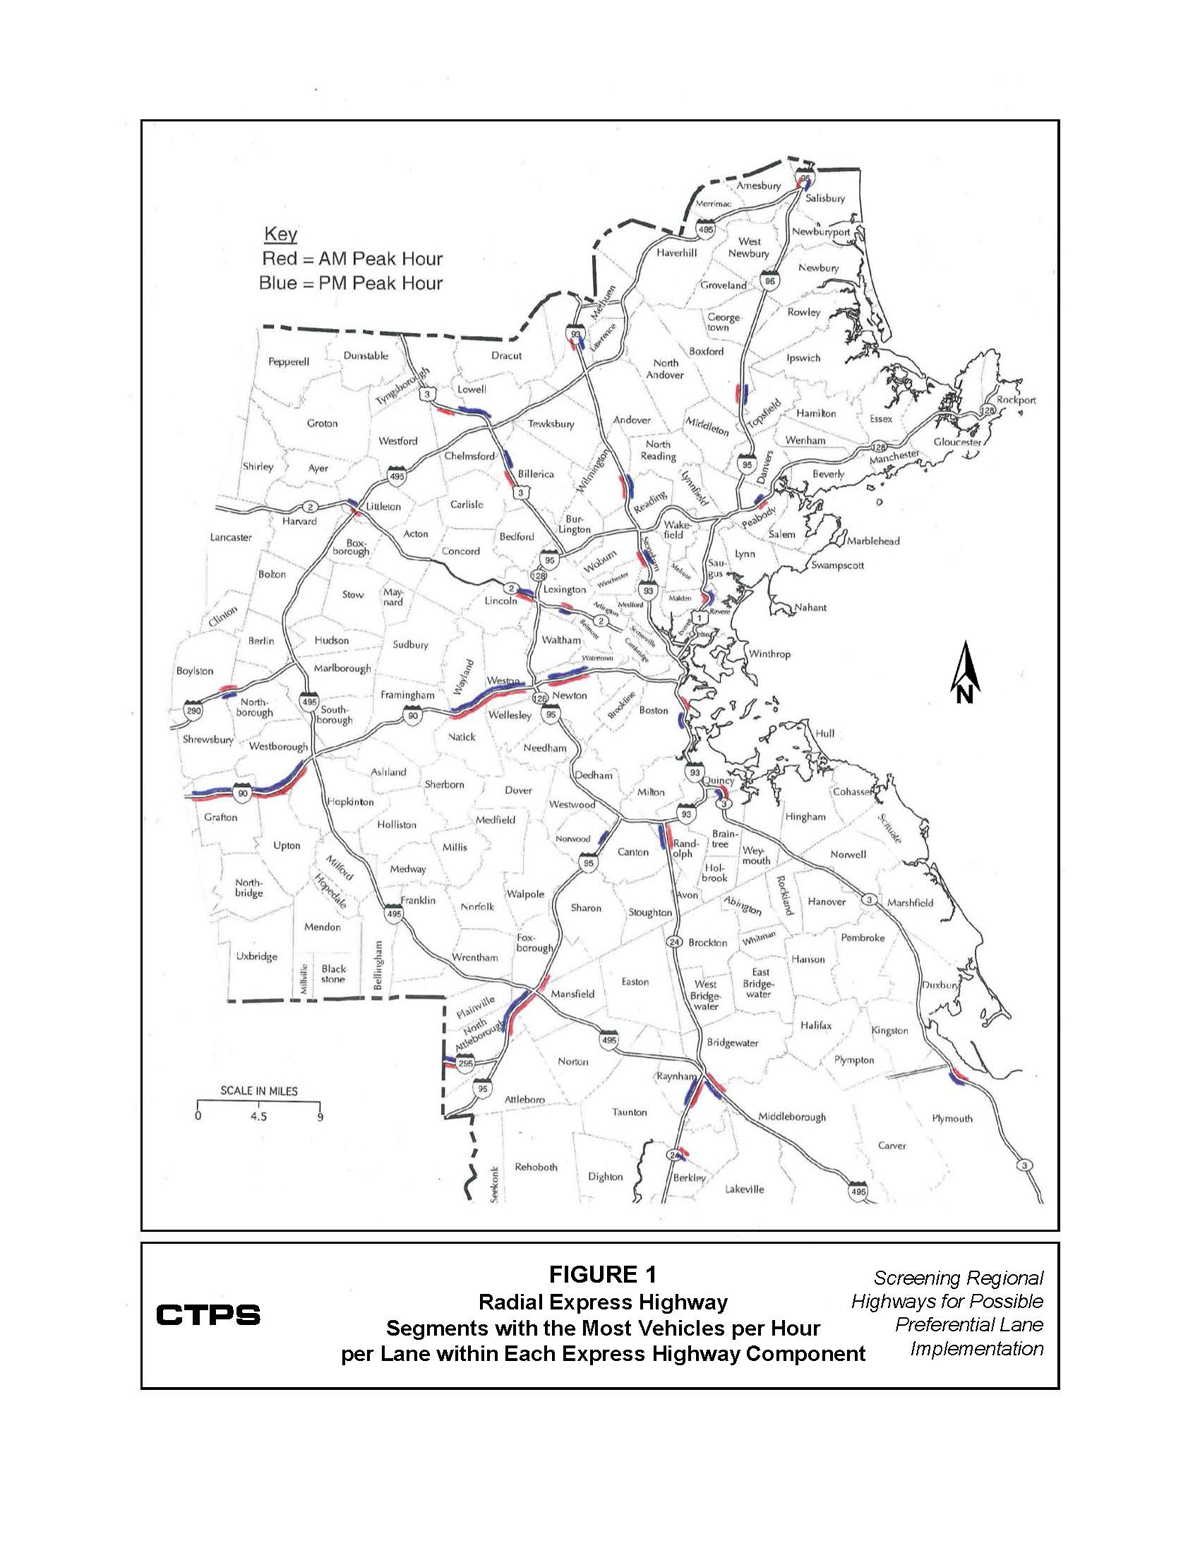 Where can you find a map of eastern Massachusetts?